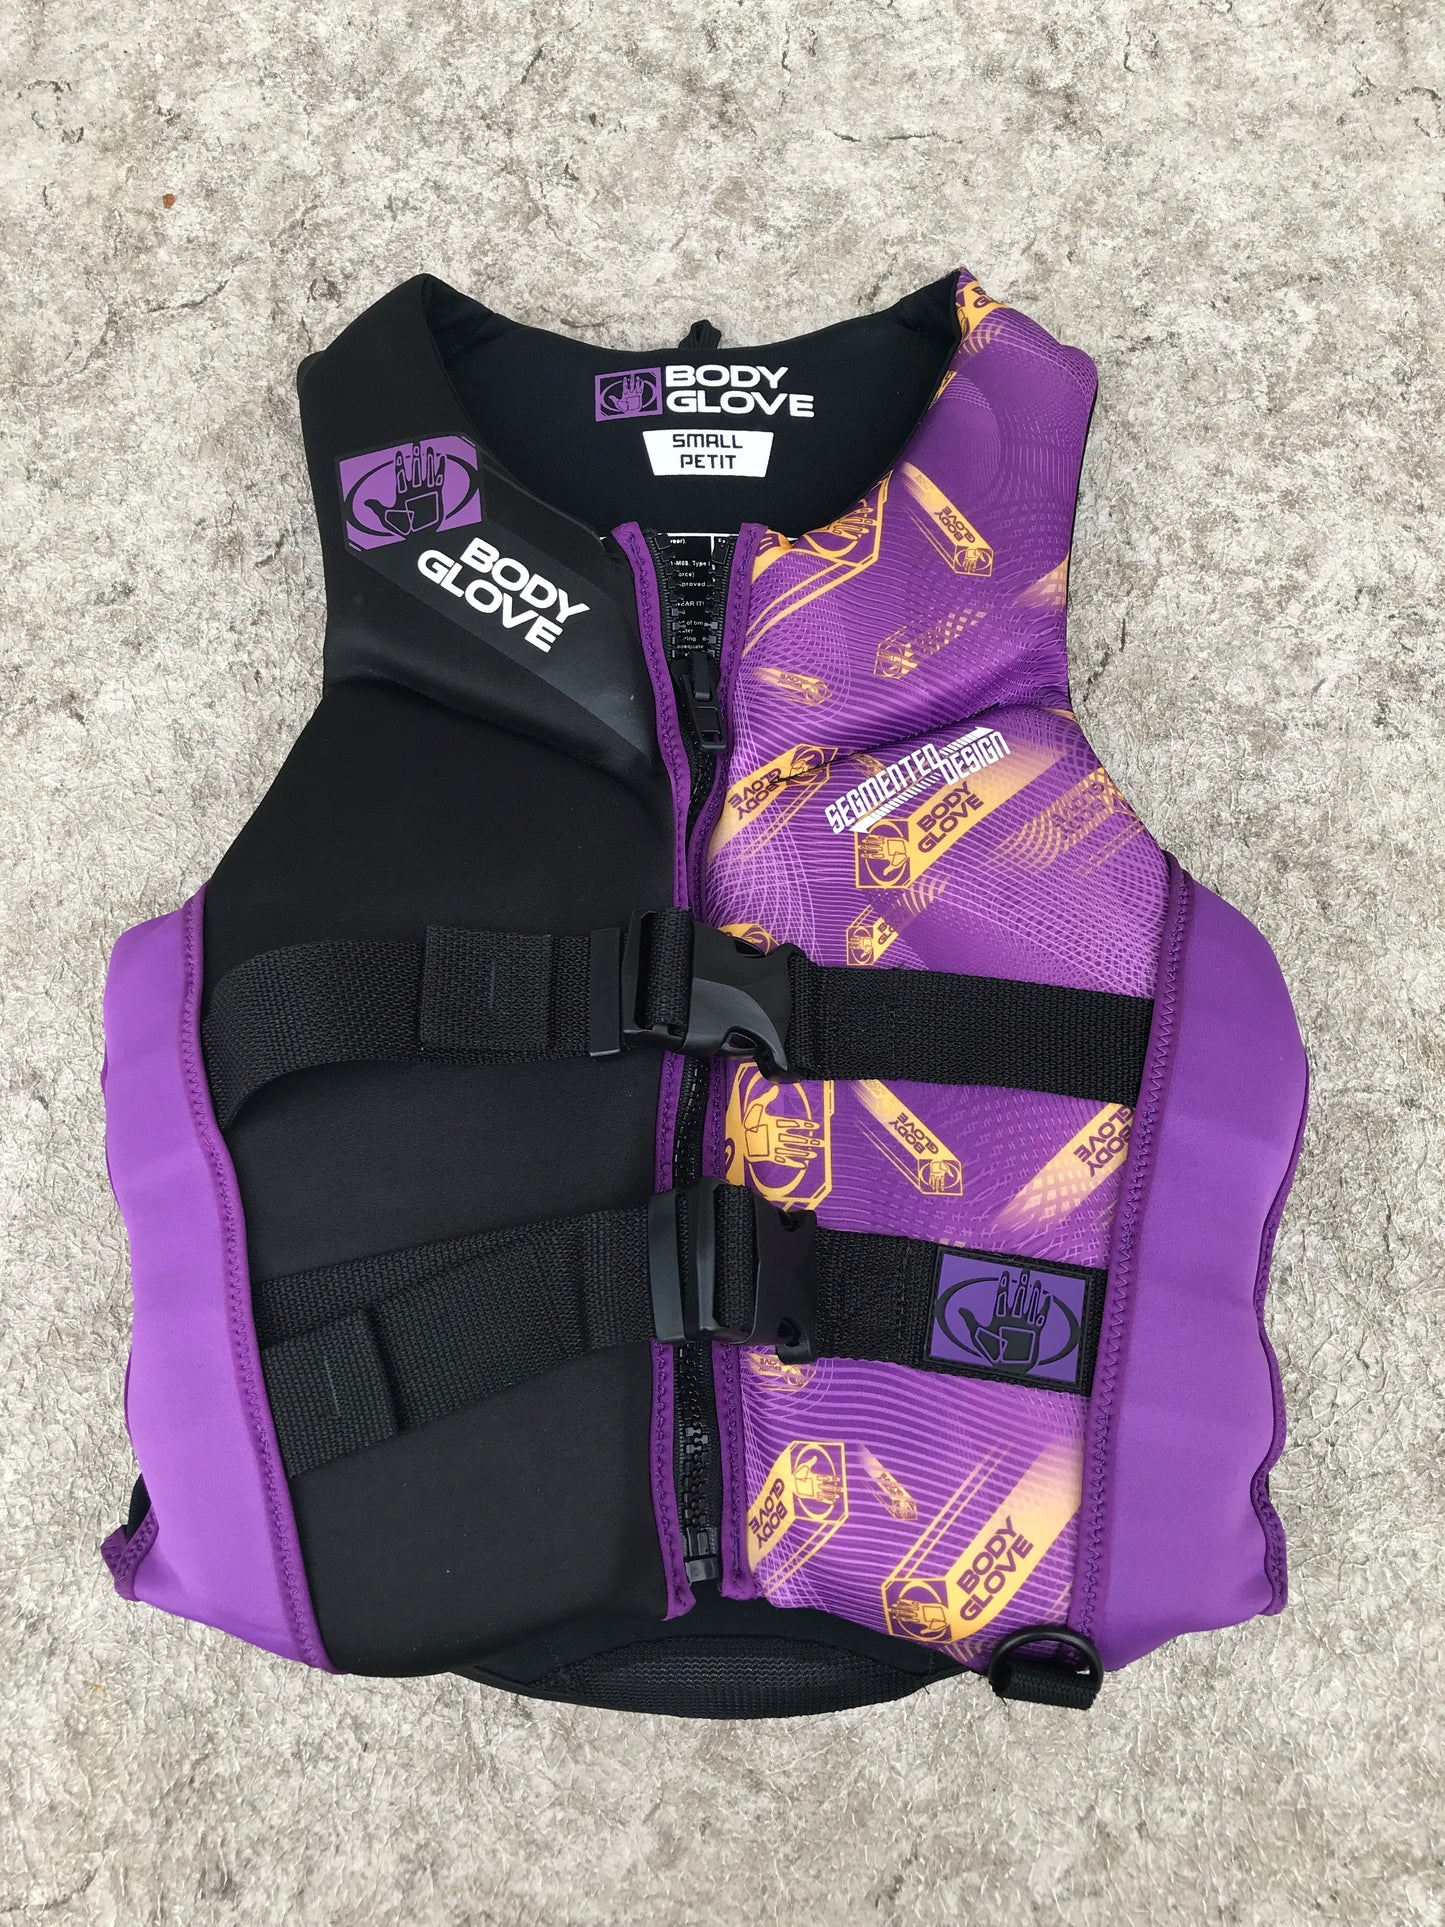 Life Jacket Adult Size Small Body Glove Neoprene Purple and Black Excellent